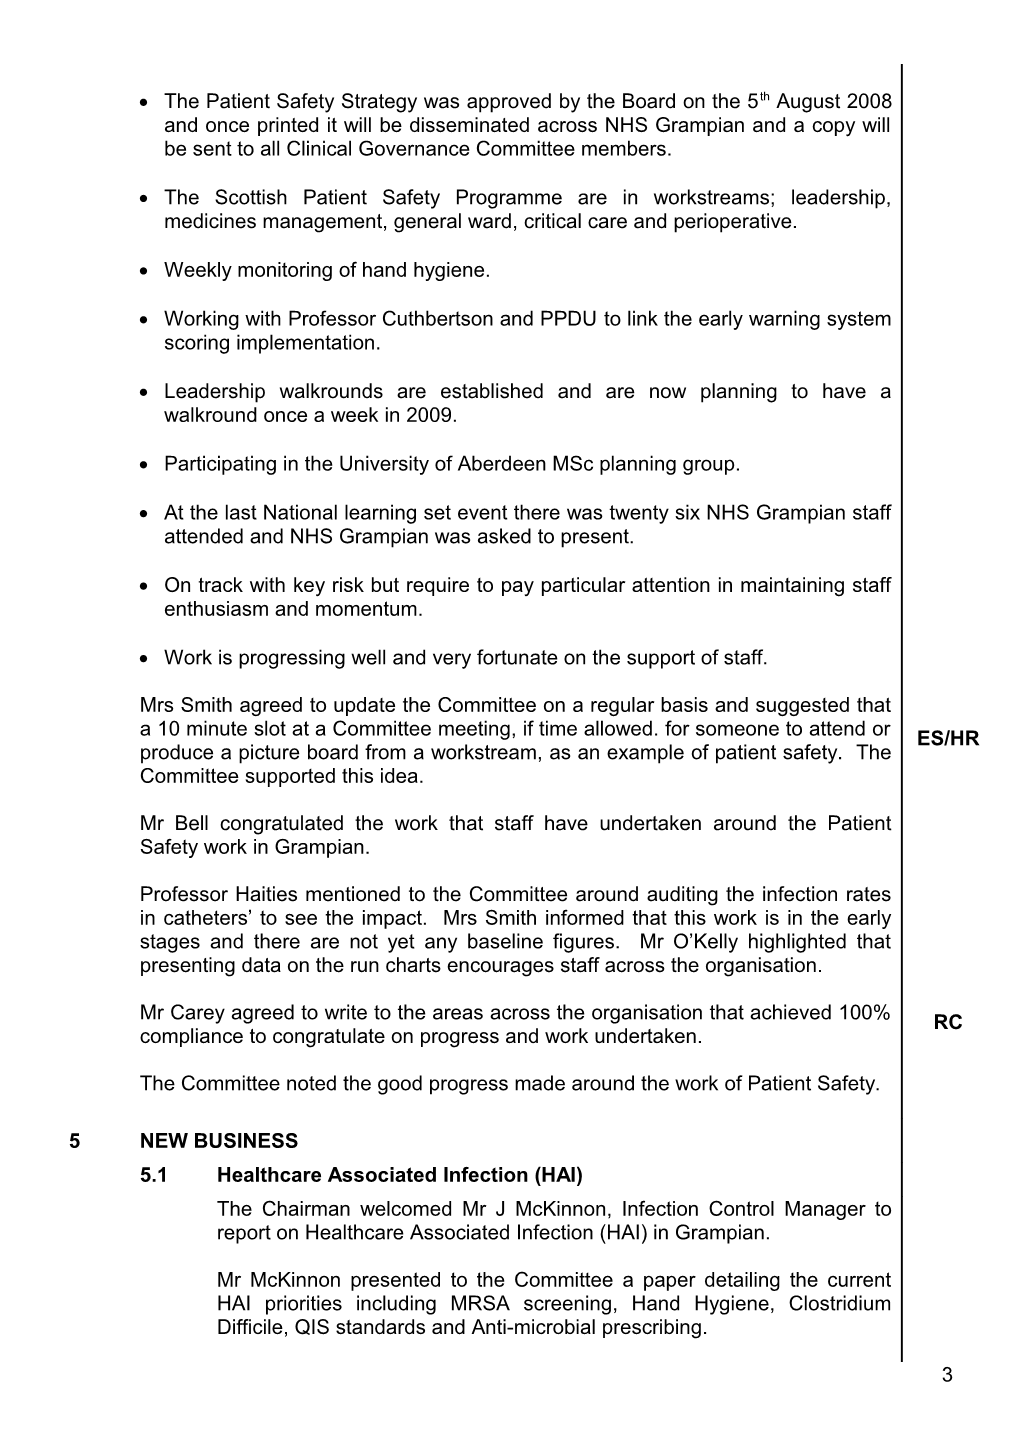 Item 10.12 Clinical Governance Committee of 29 August 2008